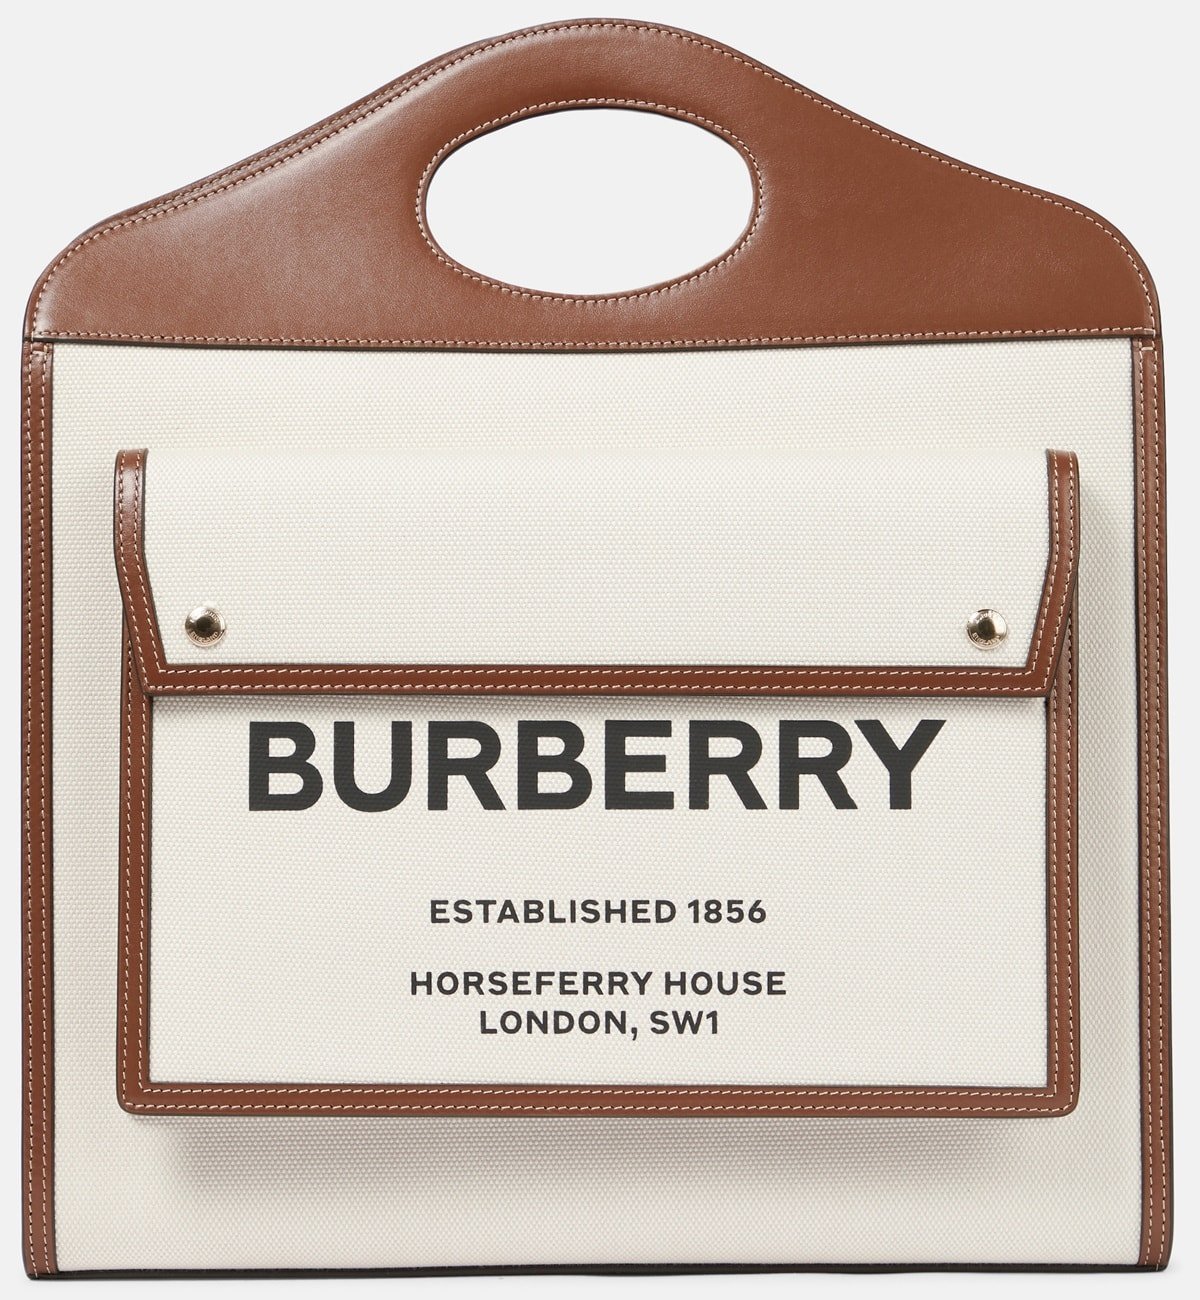 Horseferry House Burberry is the global headquarters and flagship store of the British luxury fashion brand Burberry